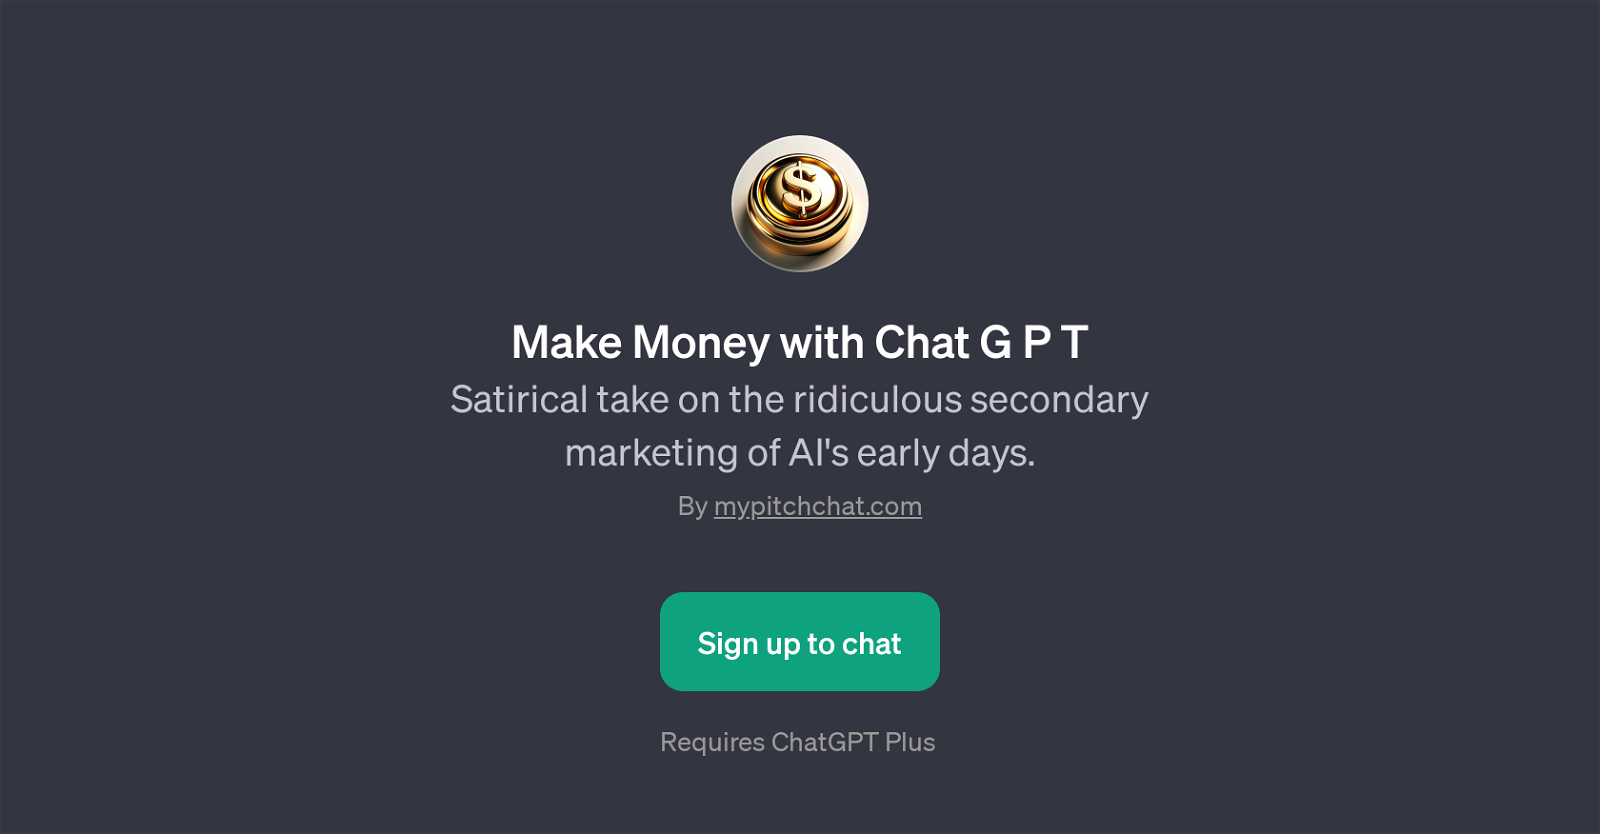 Make Money with Chat GPT website